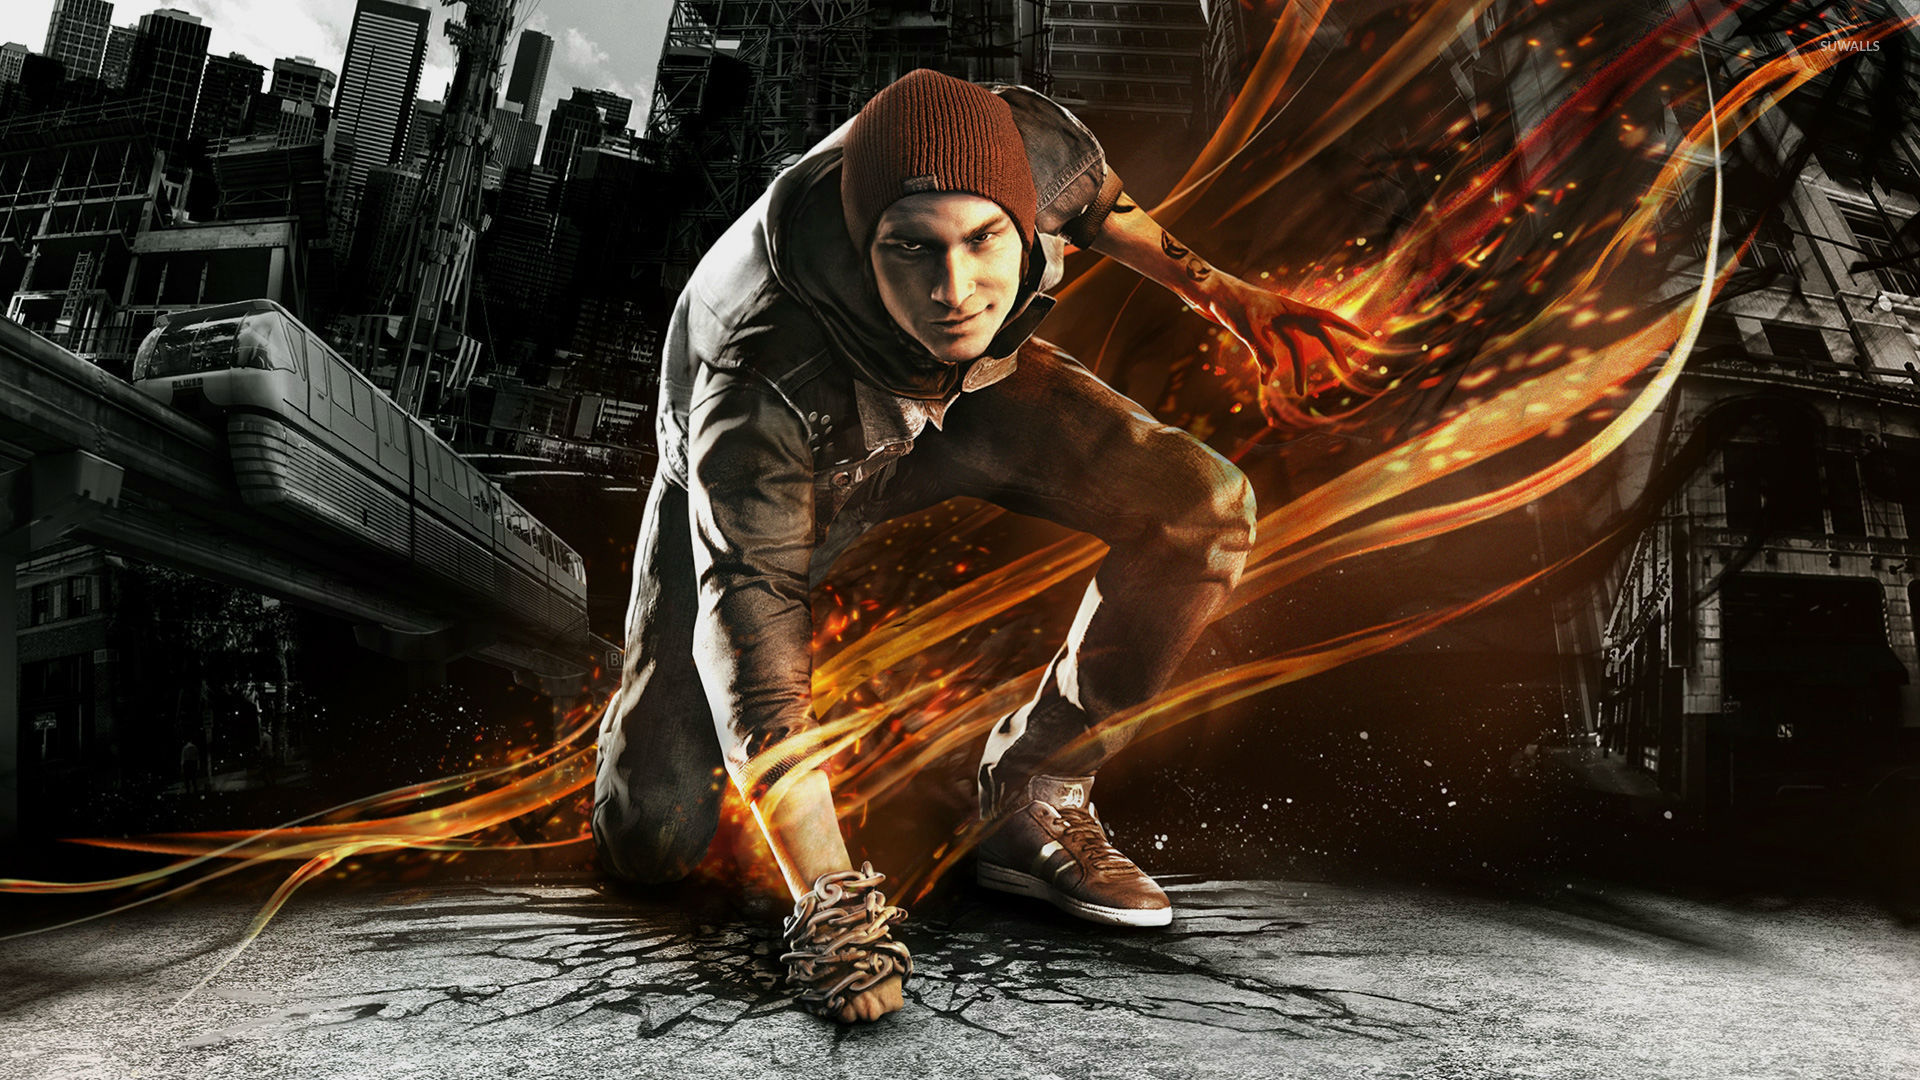 inFAMOUS Wallpapers